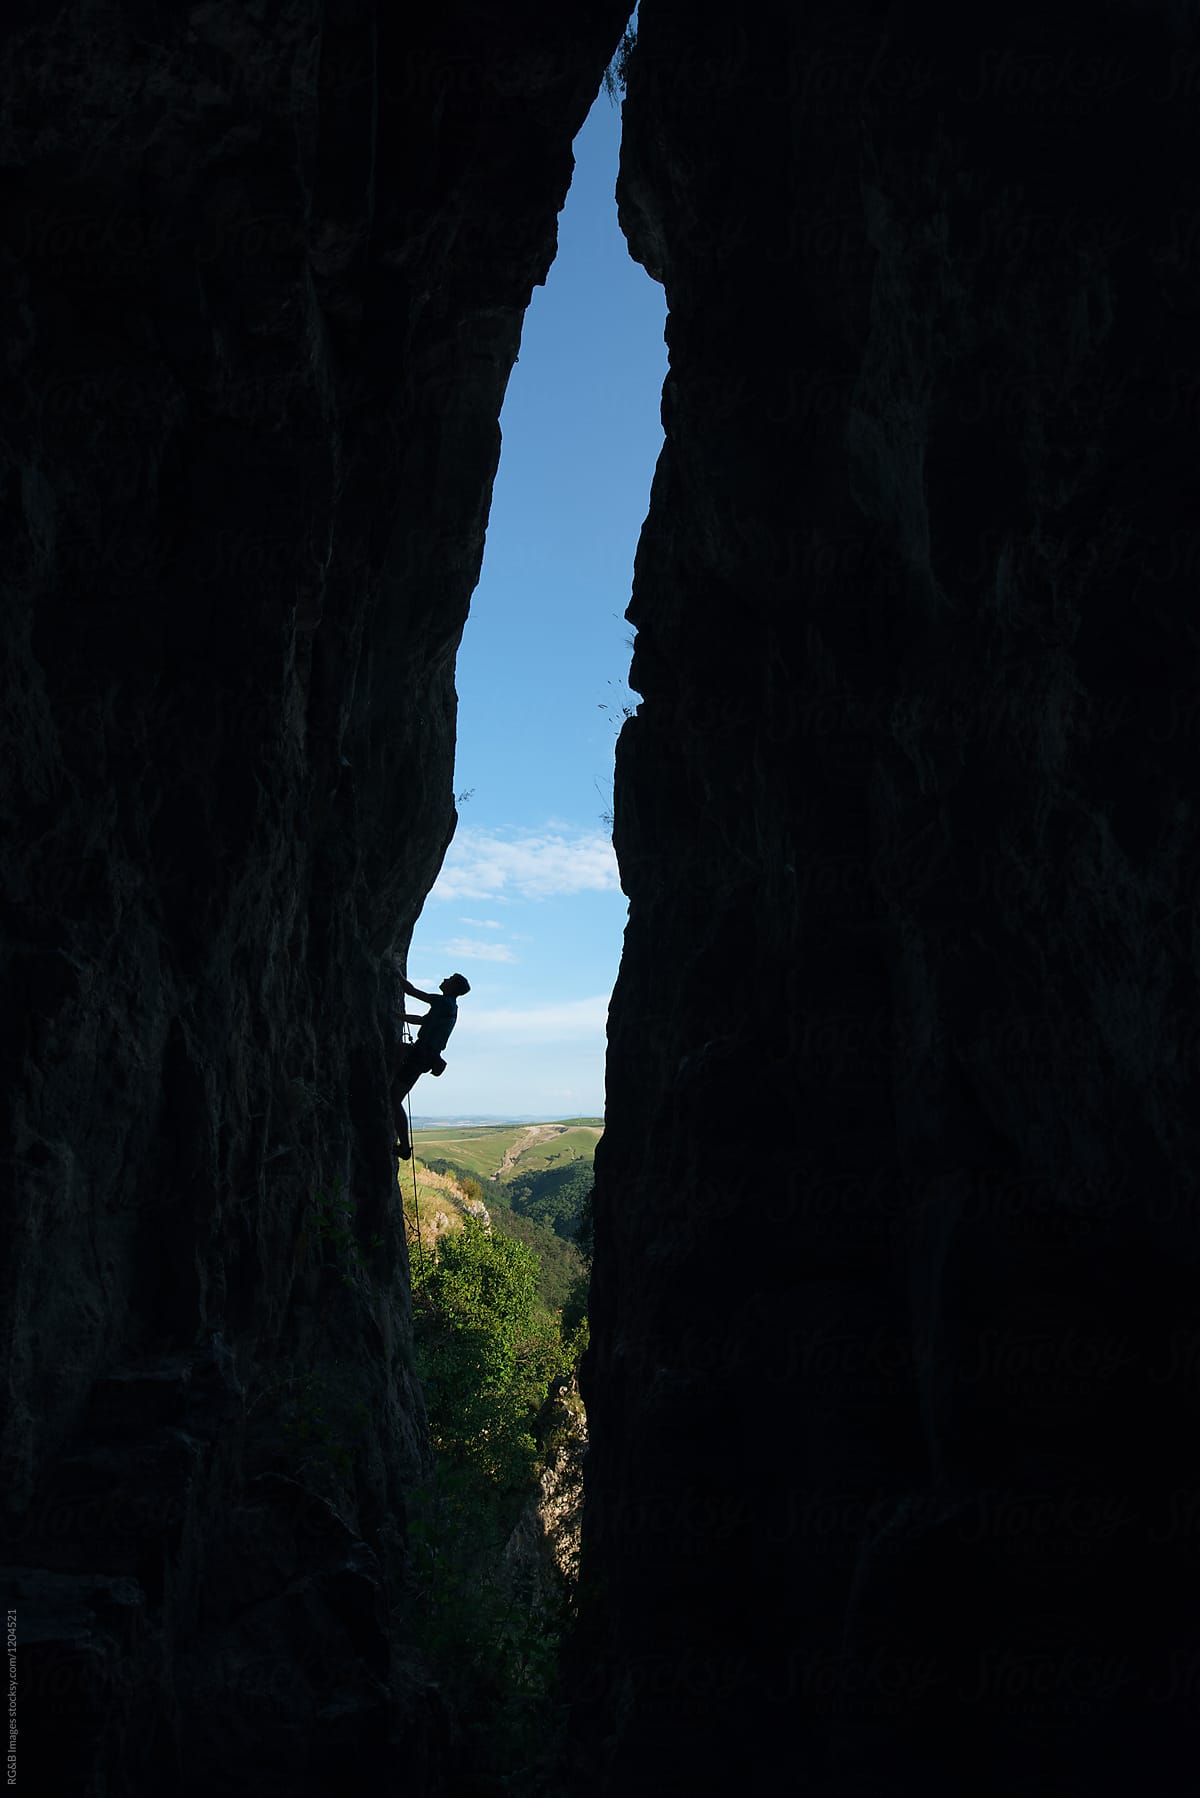 Male alpinist ascending on a vertical rock cave outdoor